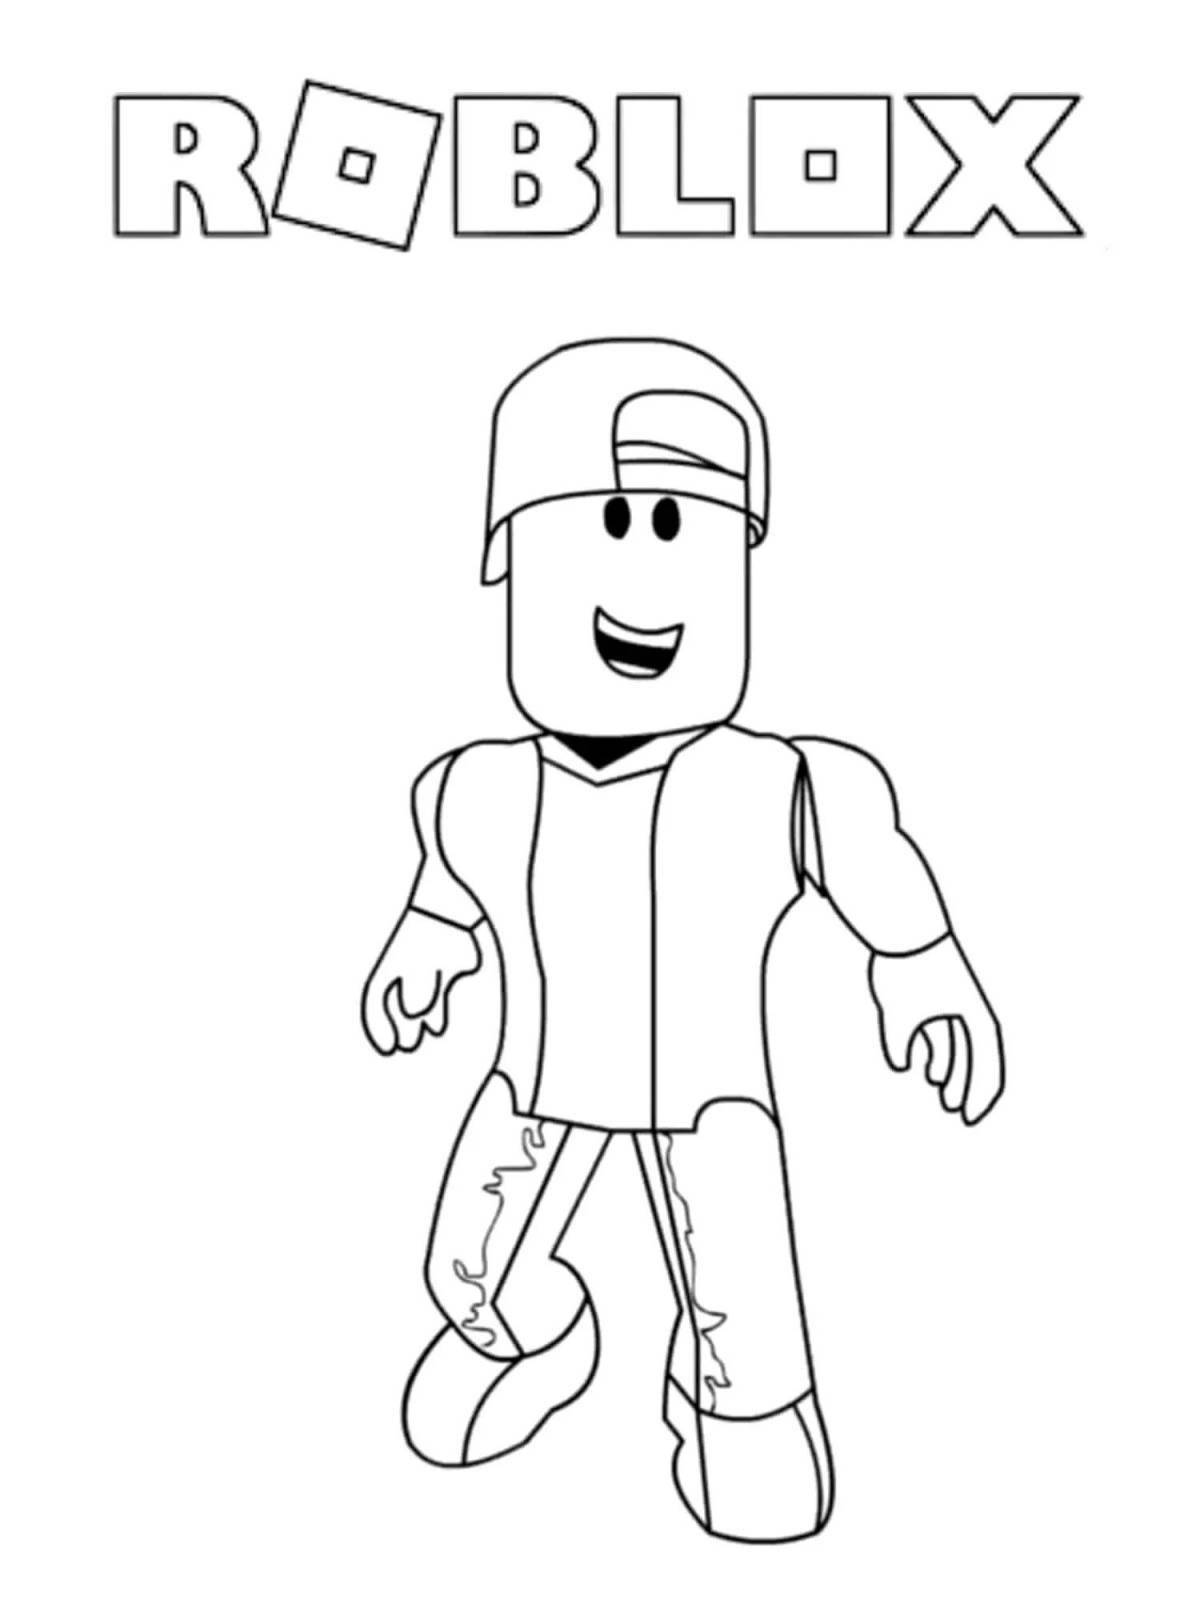 Color-lively roblox player coloring page